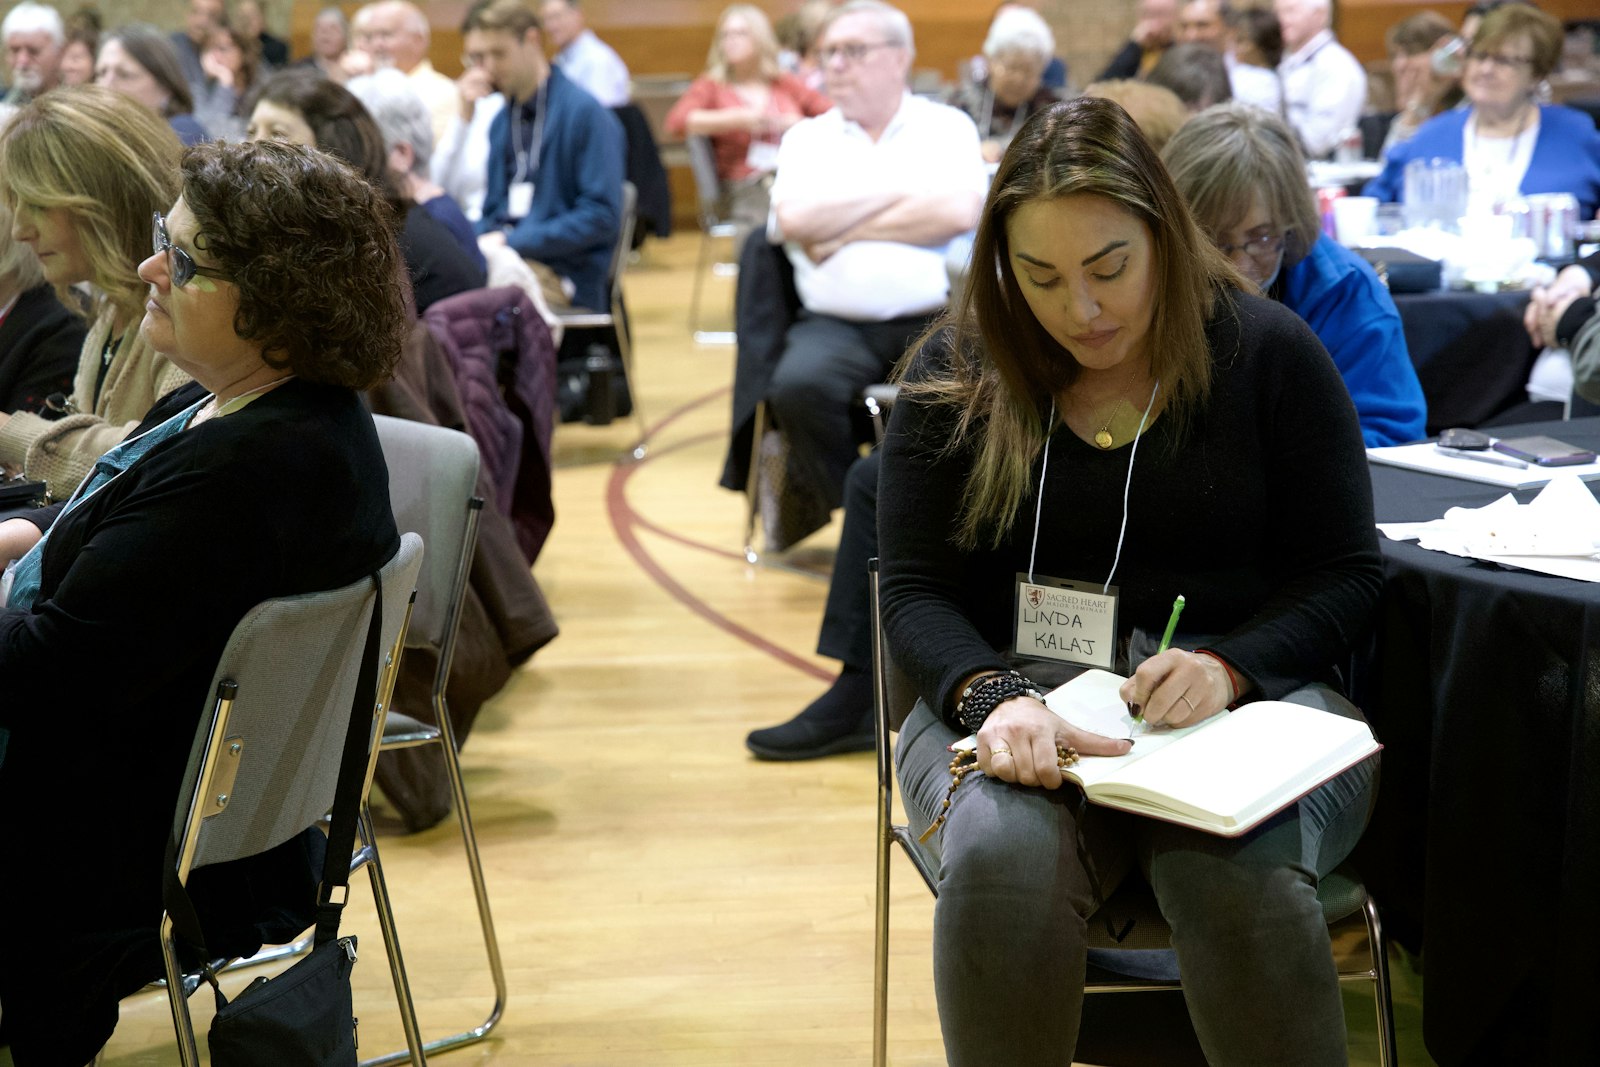 An attendee takes notes on Fr. Calloway's talk with her rosary in hand. Throughout history, Fr. Calloway said, the devil has tried to keep the rosary from the hands of the people of God, but it has persevered.